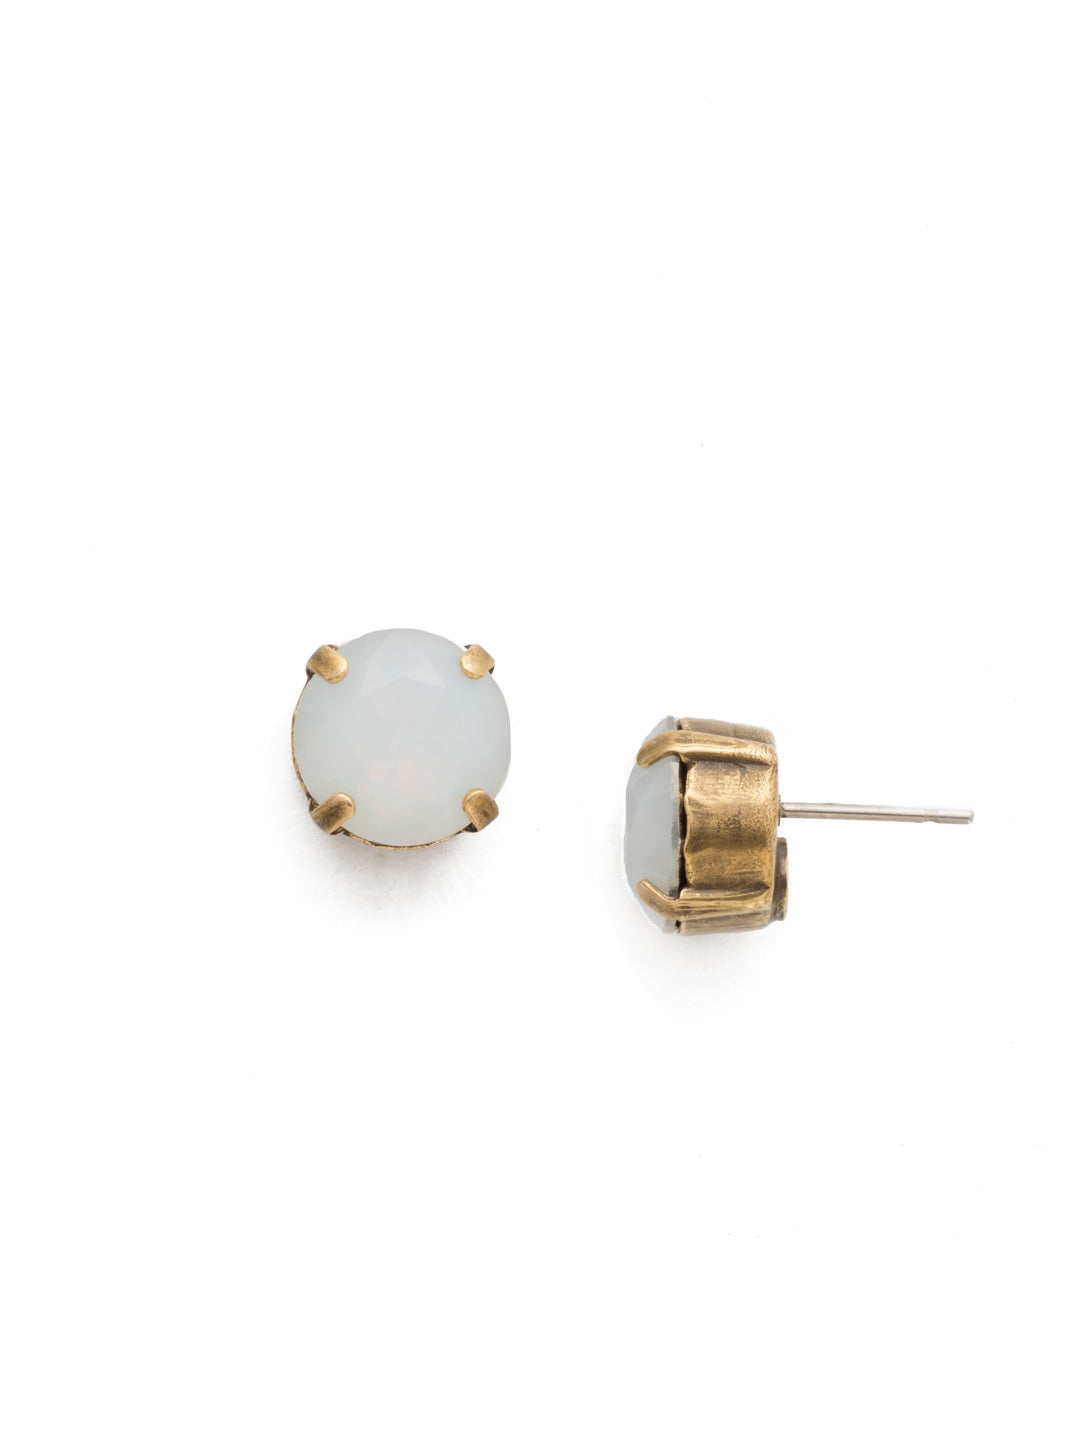 London Stud Earrings - ECM14AGWO - <p>Everyone needs a great pair of studs. Add some classic sparkle to any occasion with these stud earrings. Need help picking a stud? <a href="https://www.sorrelli.com/blogs/sisterhood/round-stud-earrings-101-a-rundown-of-sizes-styles-and-sparkle">Check out our size guide!</a> From Sorrelli's White Opal collection in our Antique Gold-tone finish.</p>